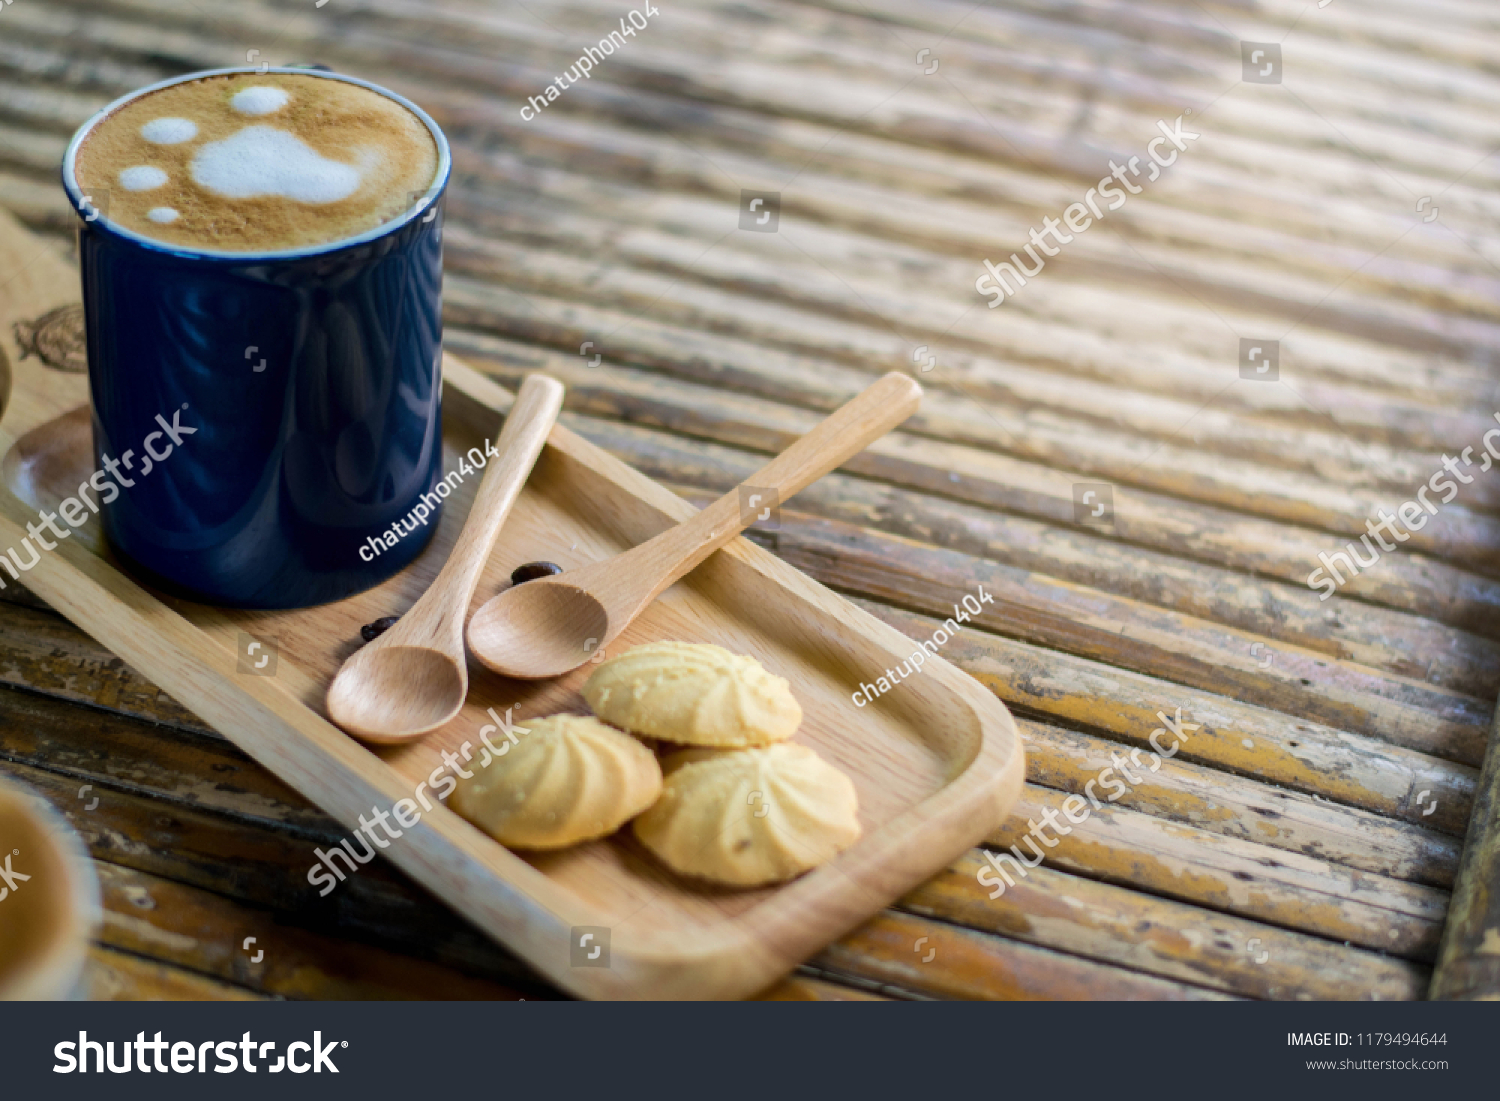 Cookies in a serving tray served with morning coffee. #1179494644